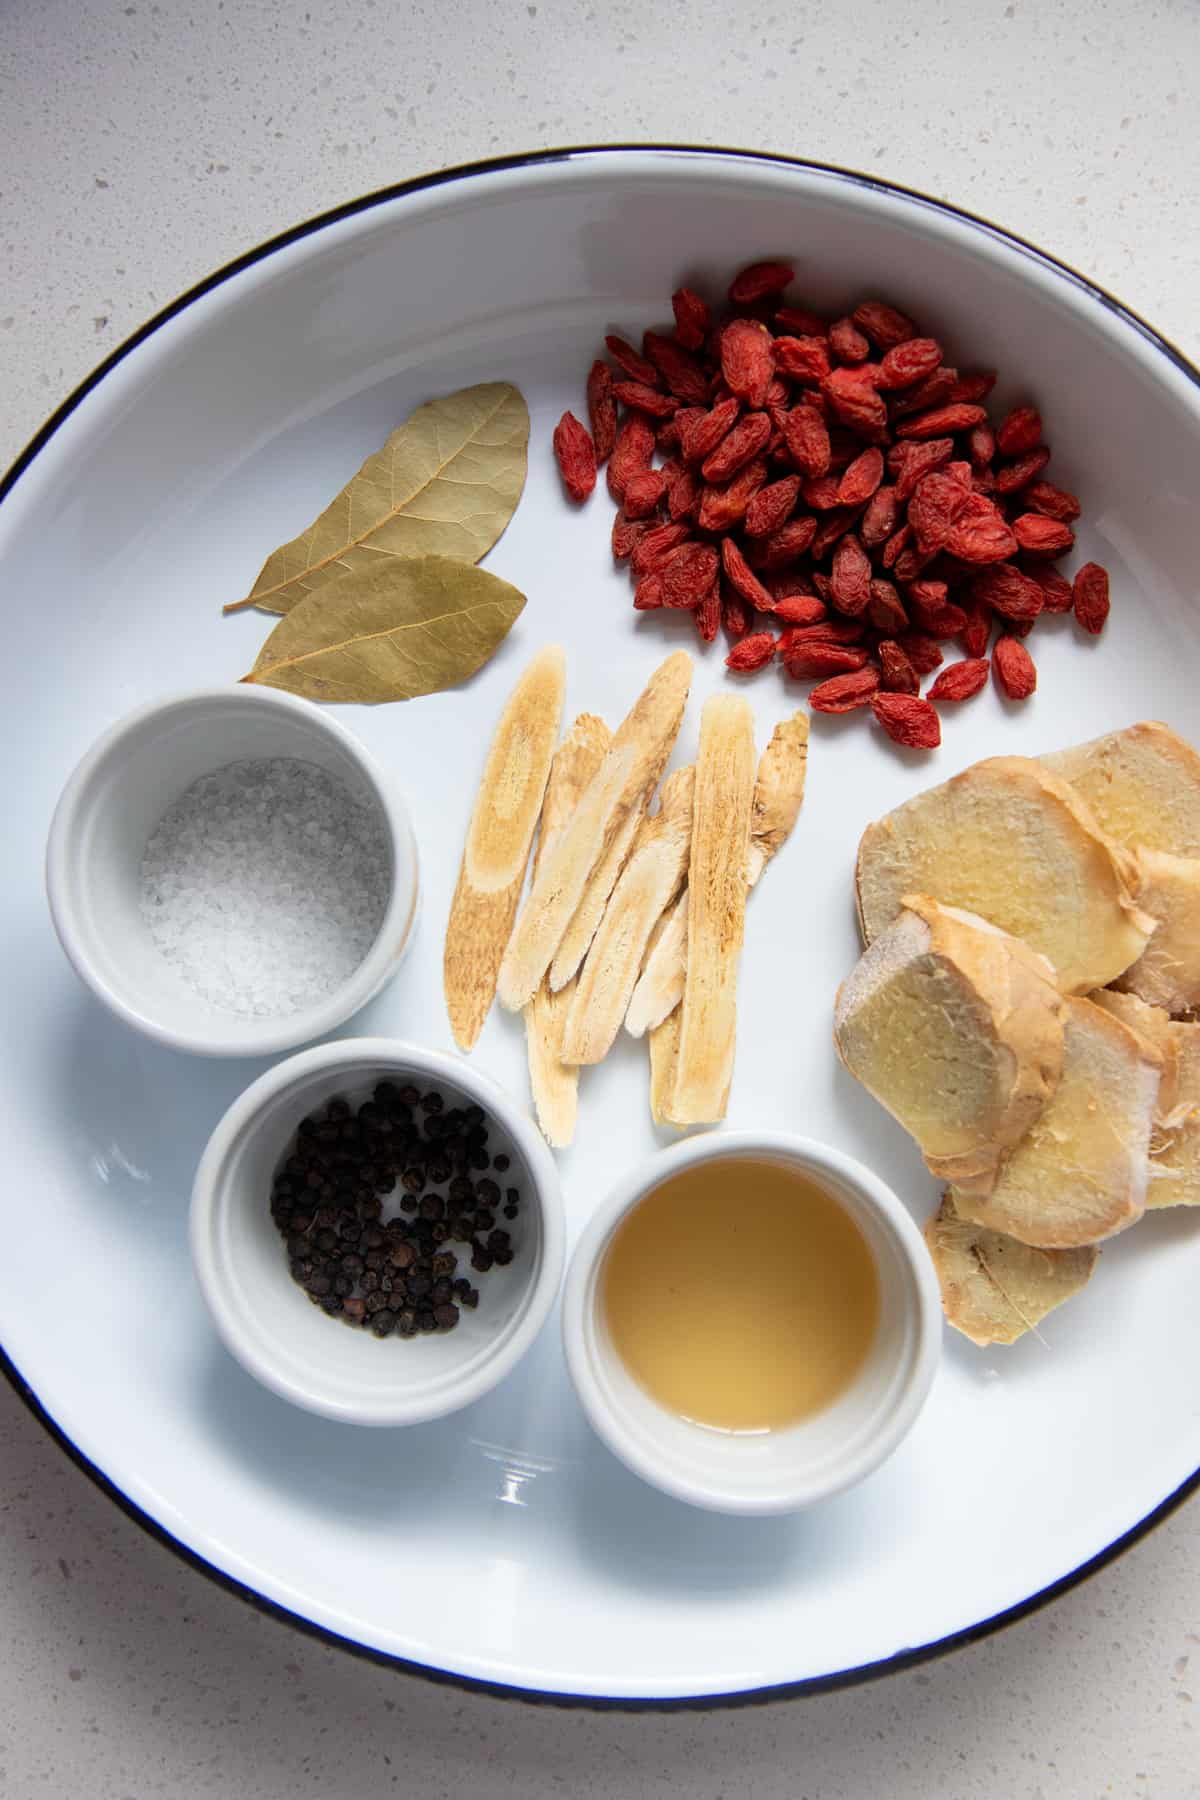 Ingredients are laid out on a white plate, including Chinese herbs and bay leaves.